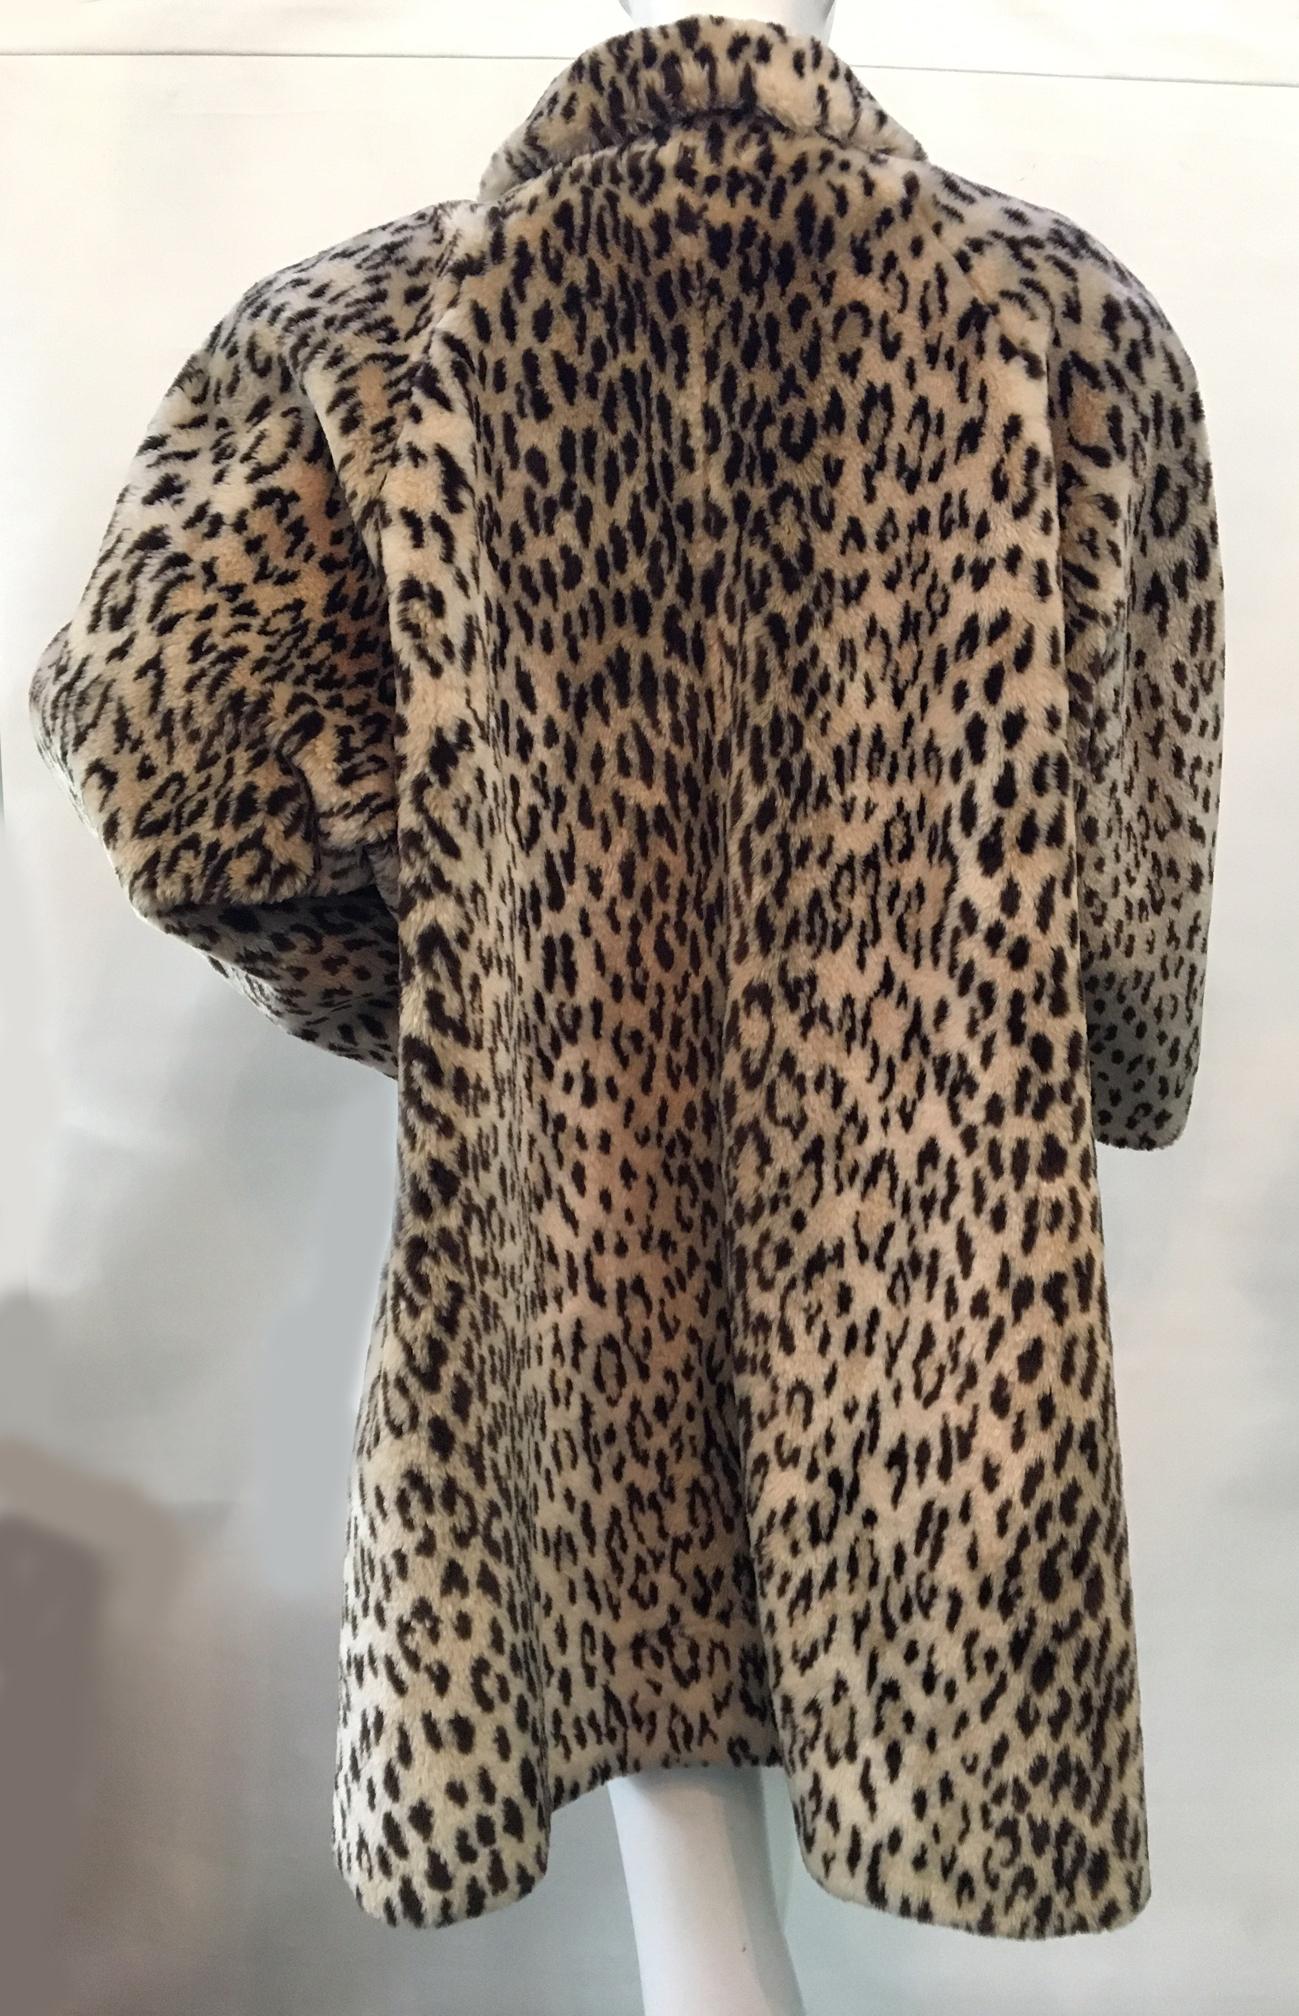 Vintage ladies faux fur swing coat in leopard print.  Very good vintage condition with very minor signs of gentle use. Single top button with hook and eyelet closures.  Made in USA.  No makers mark and no marked size.
Approx. measurements:
Bust: